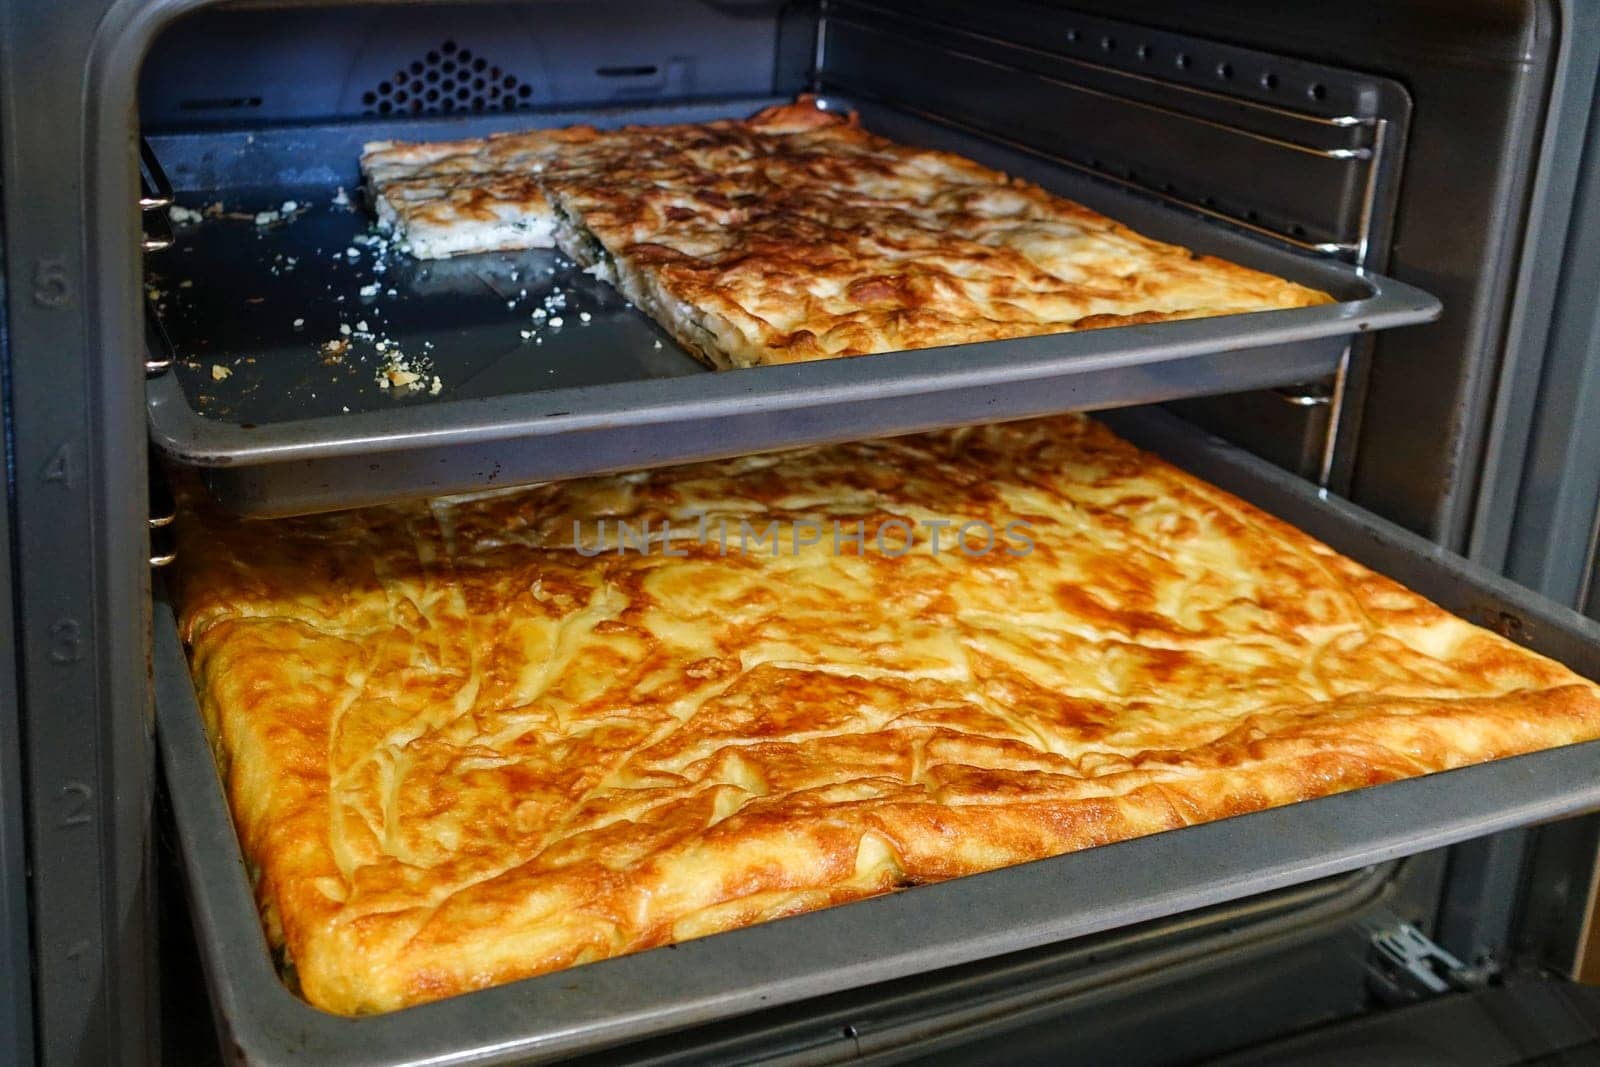 Turkish style water pastry baked in the oven, a tray full of pastries,